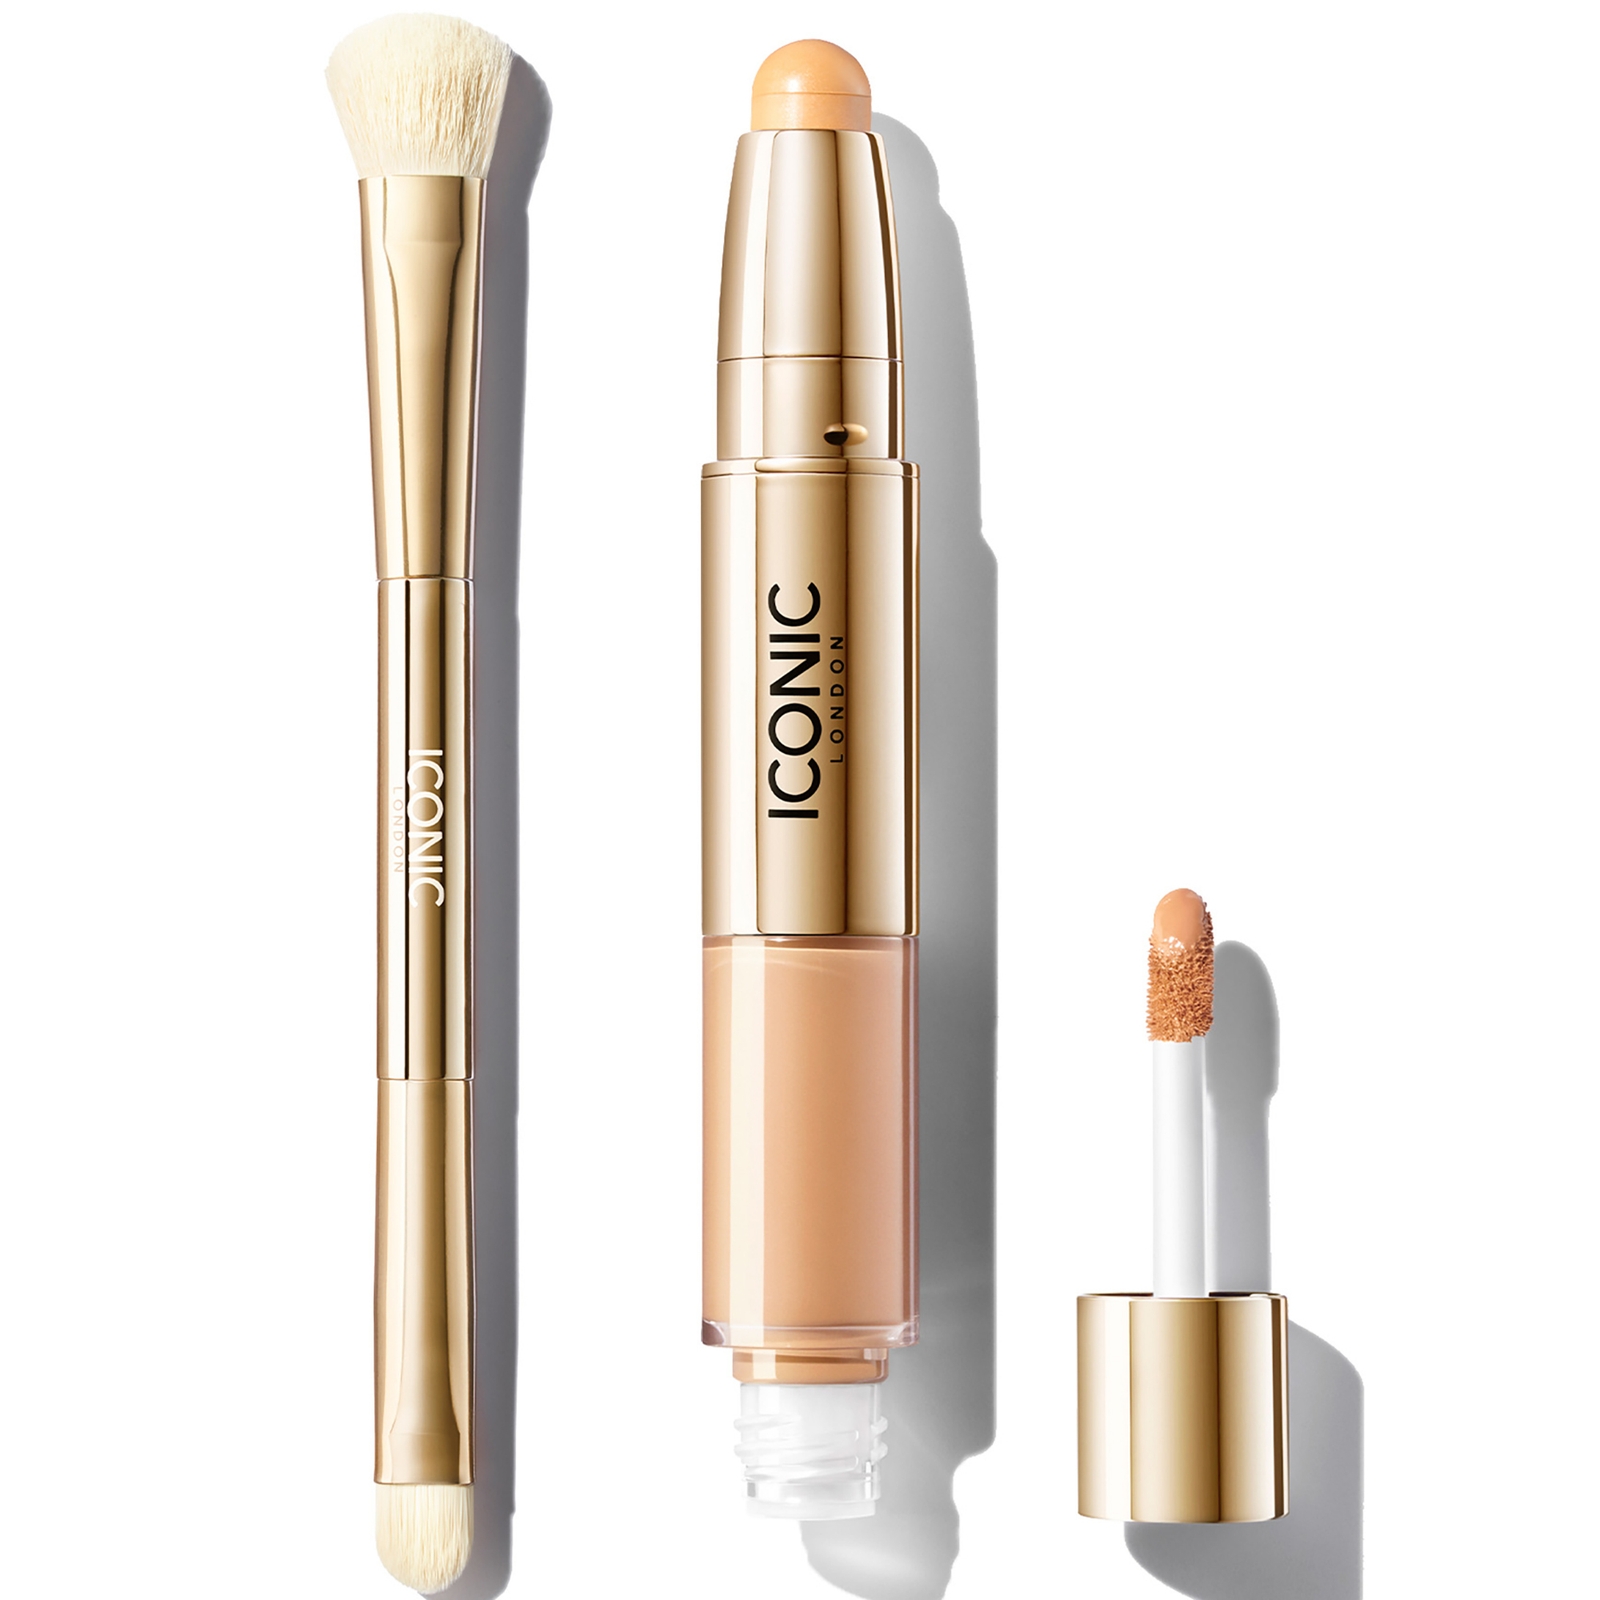 Iconic London Radiant Concealer And Brush Bundle (various Shades) - Neutral Light